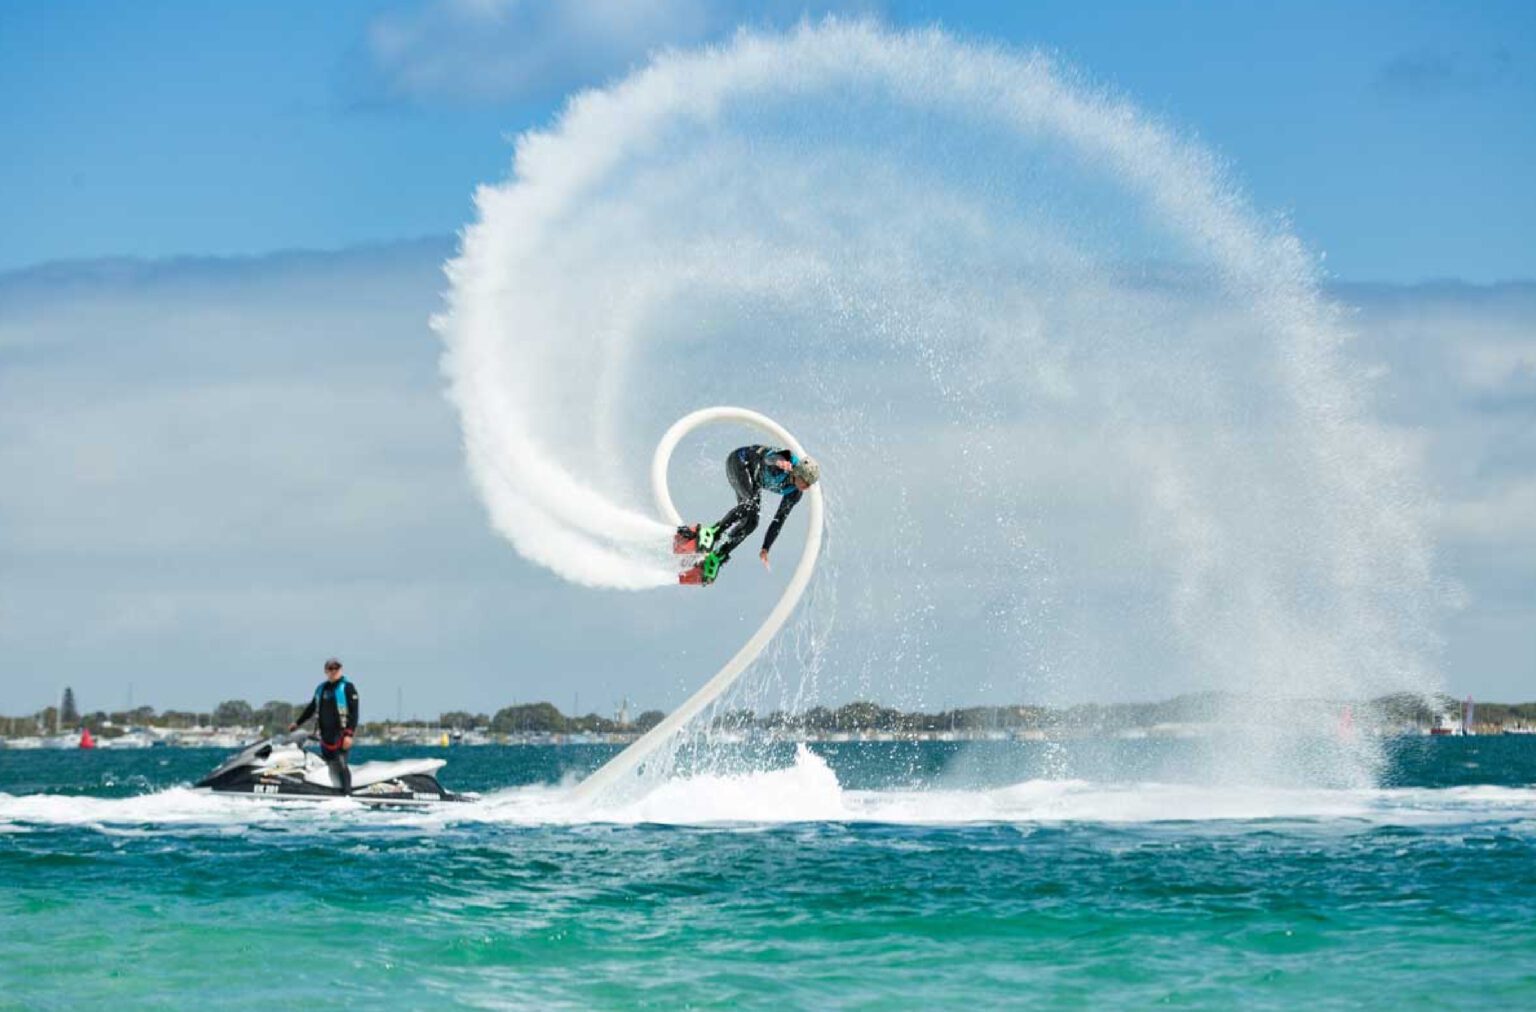 Experience a truly thrilling flyboard adventure with Dubai Yachts